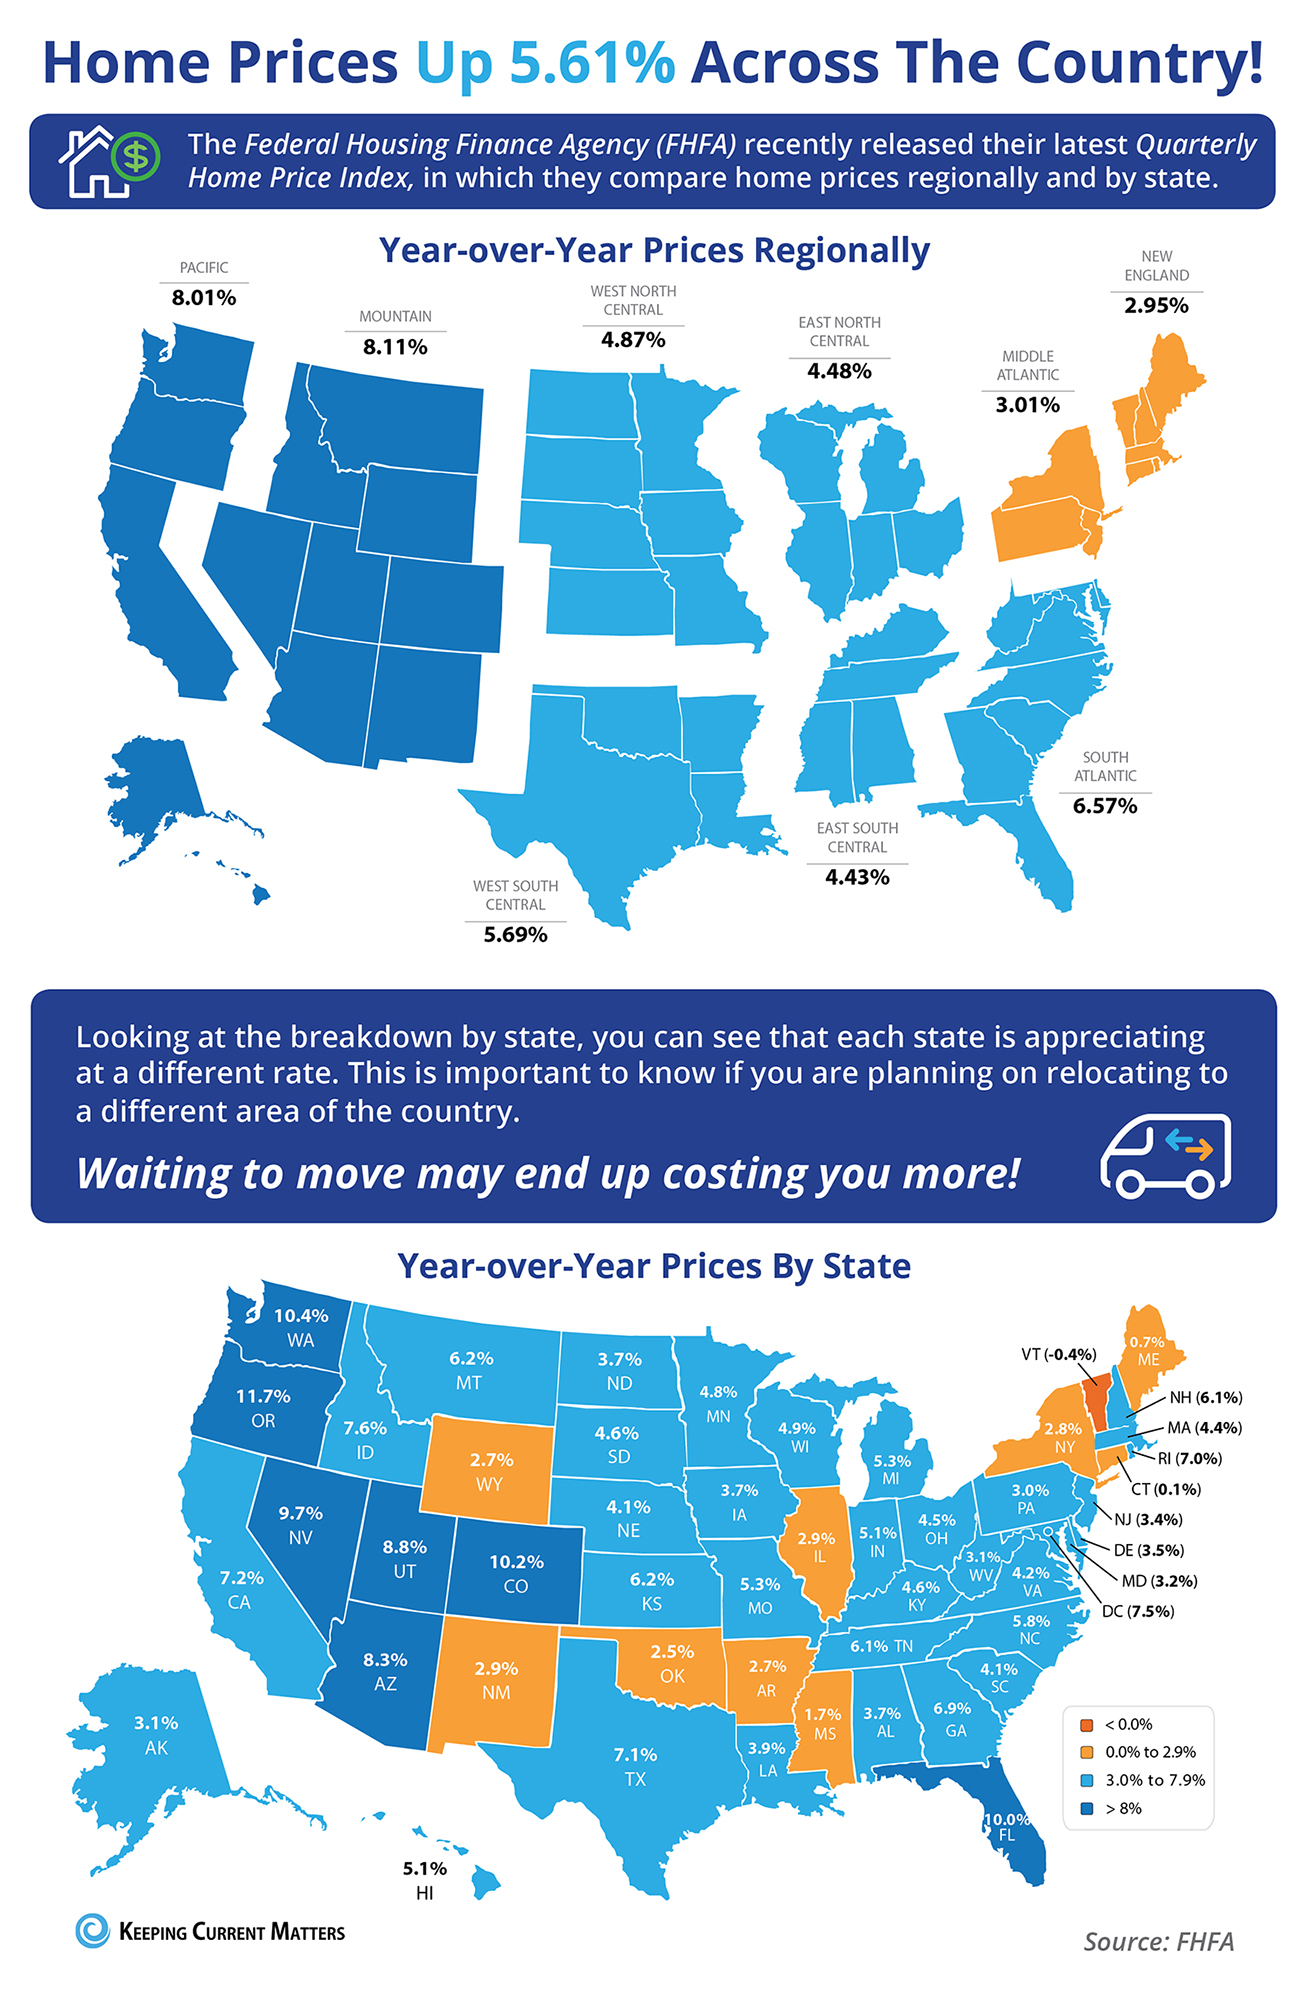 Home Prices Up 5.61% Across The Country! [INFOGRAPHIC] | Keeping Current Matters